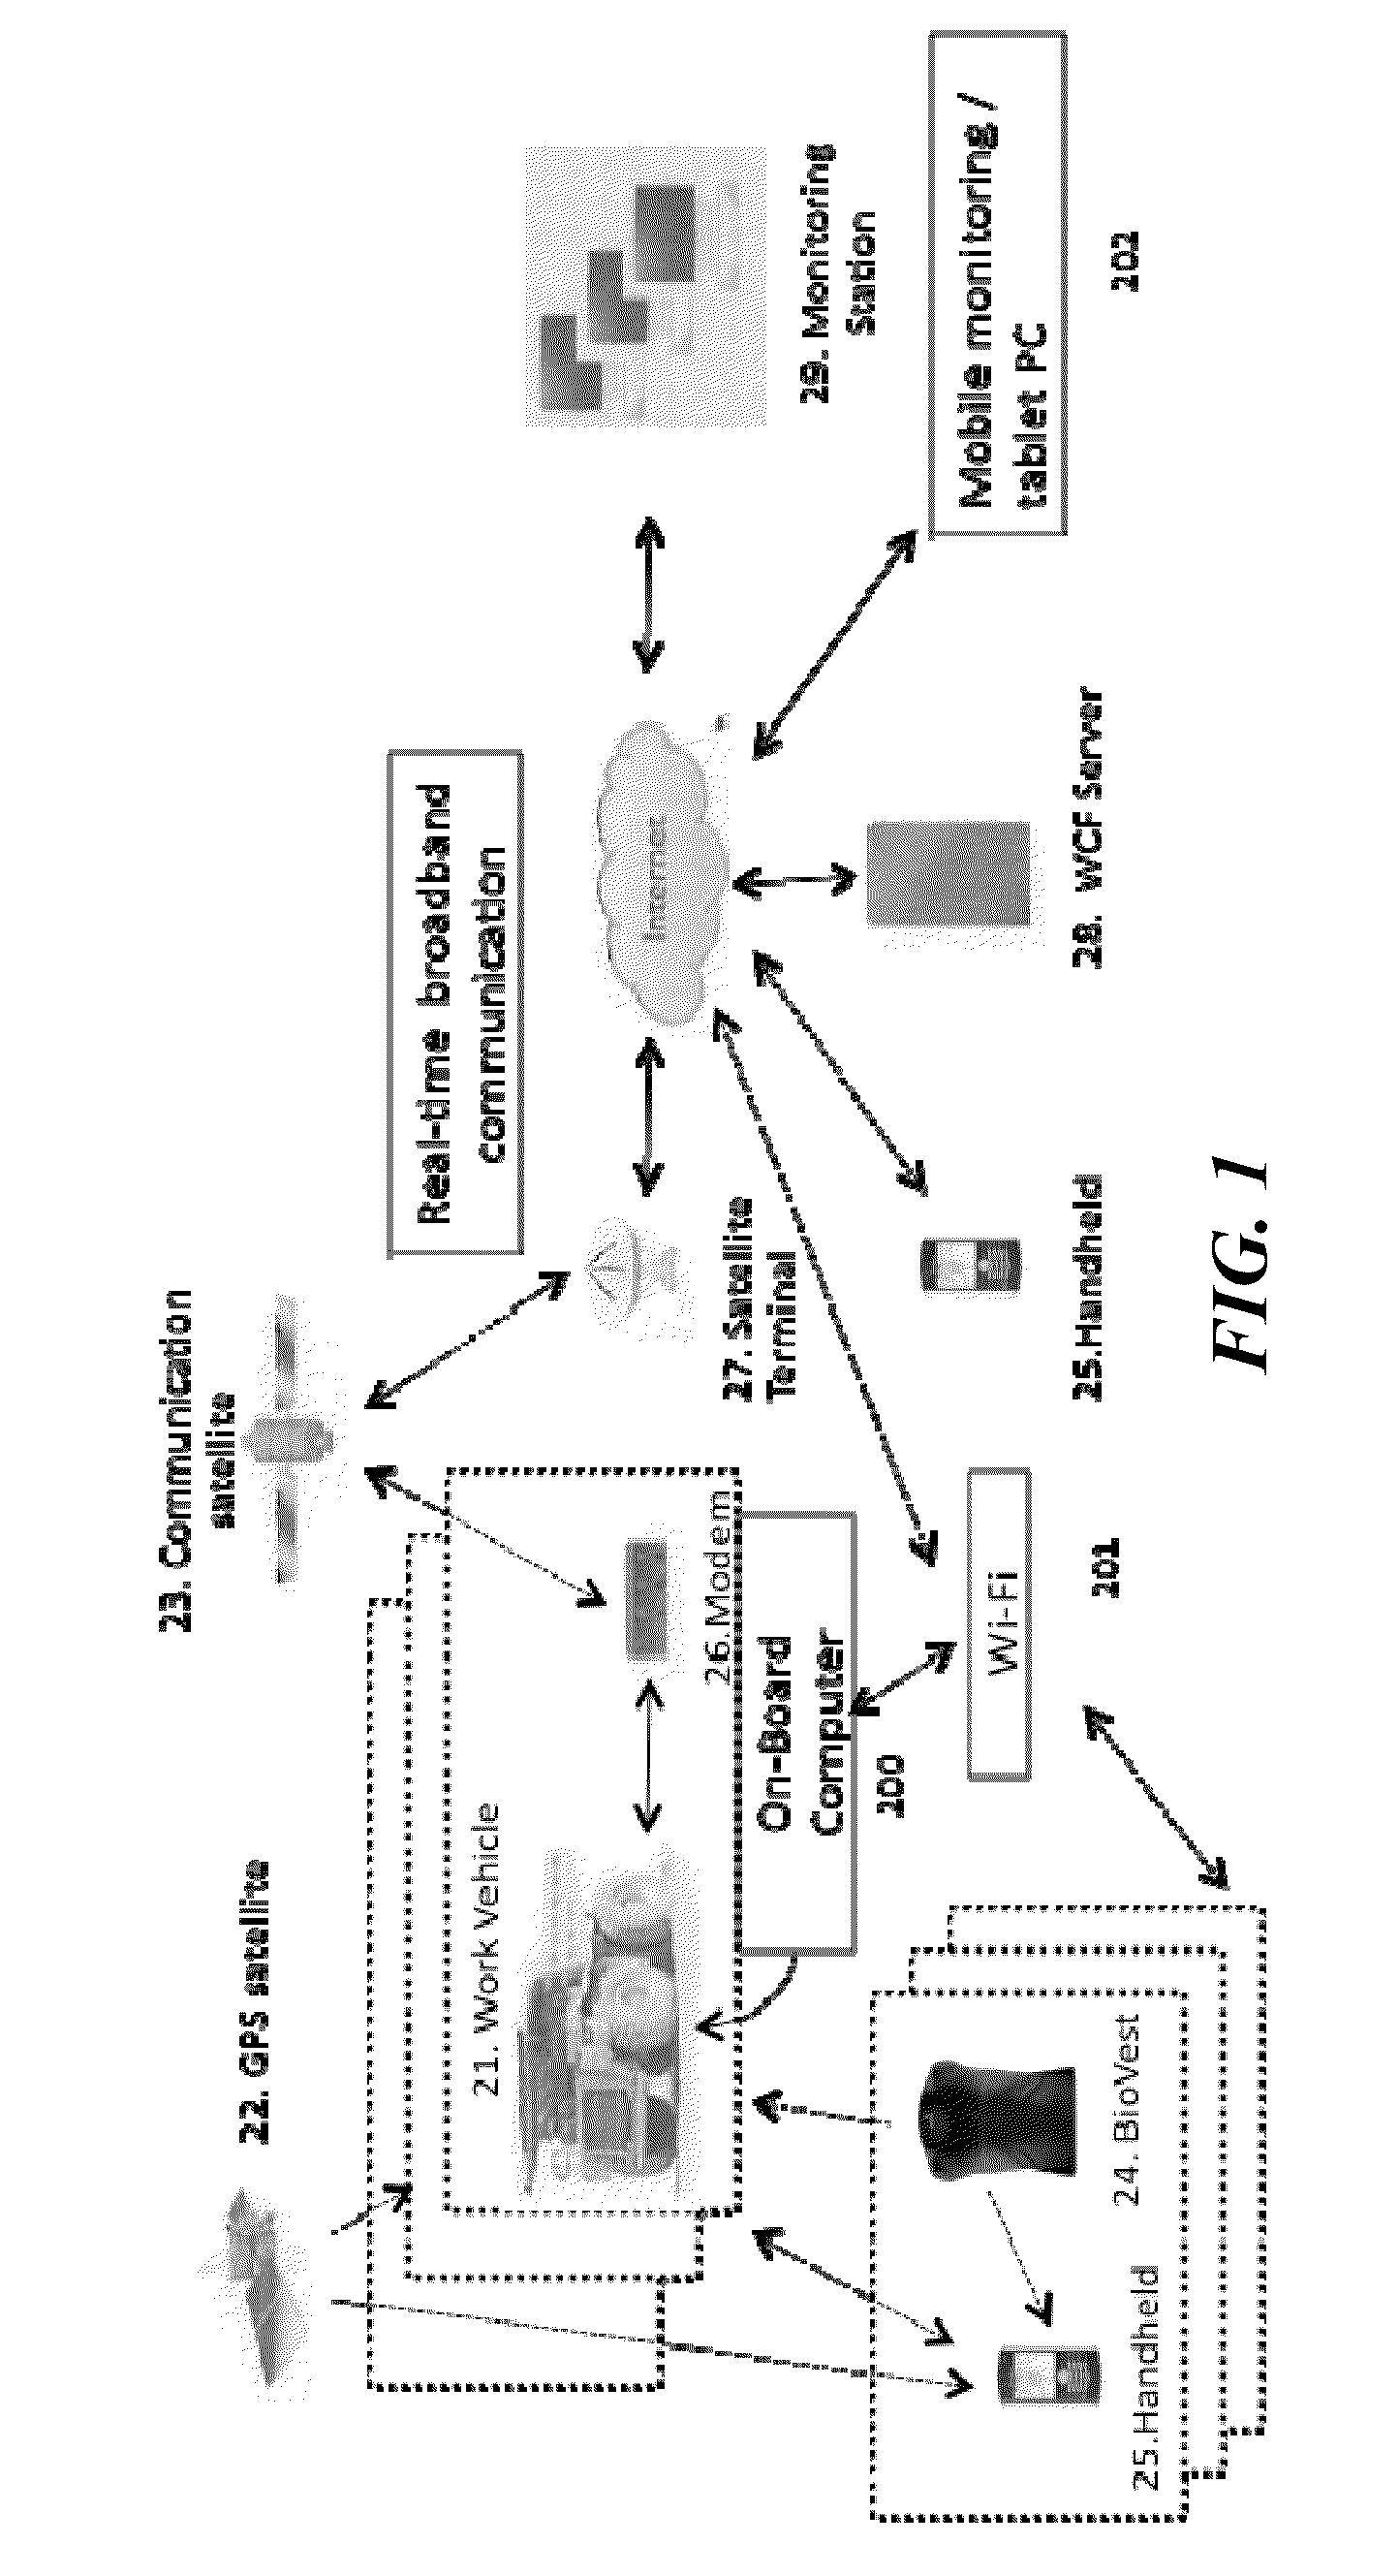 Apparatus, method, and platform for real-time mobile broadband communication data